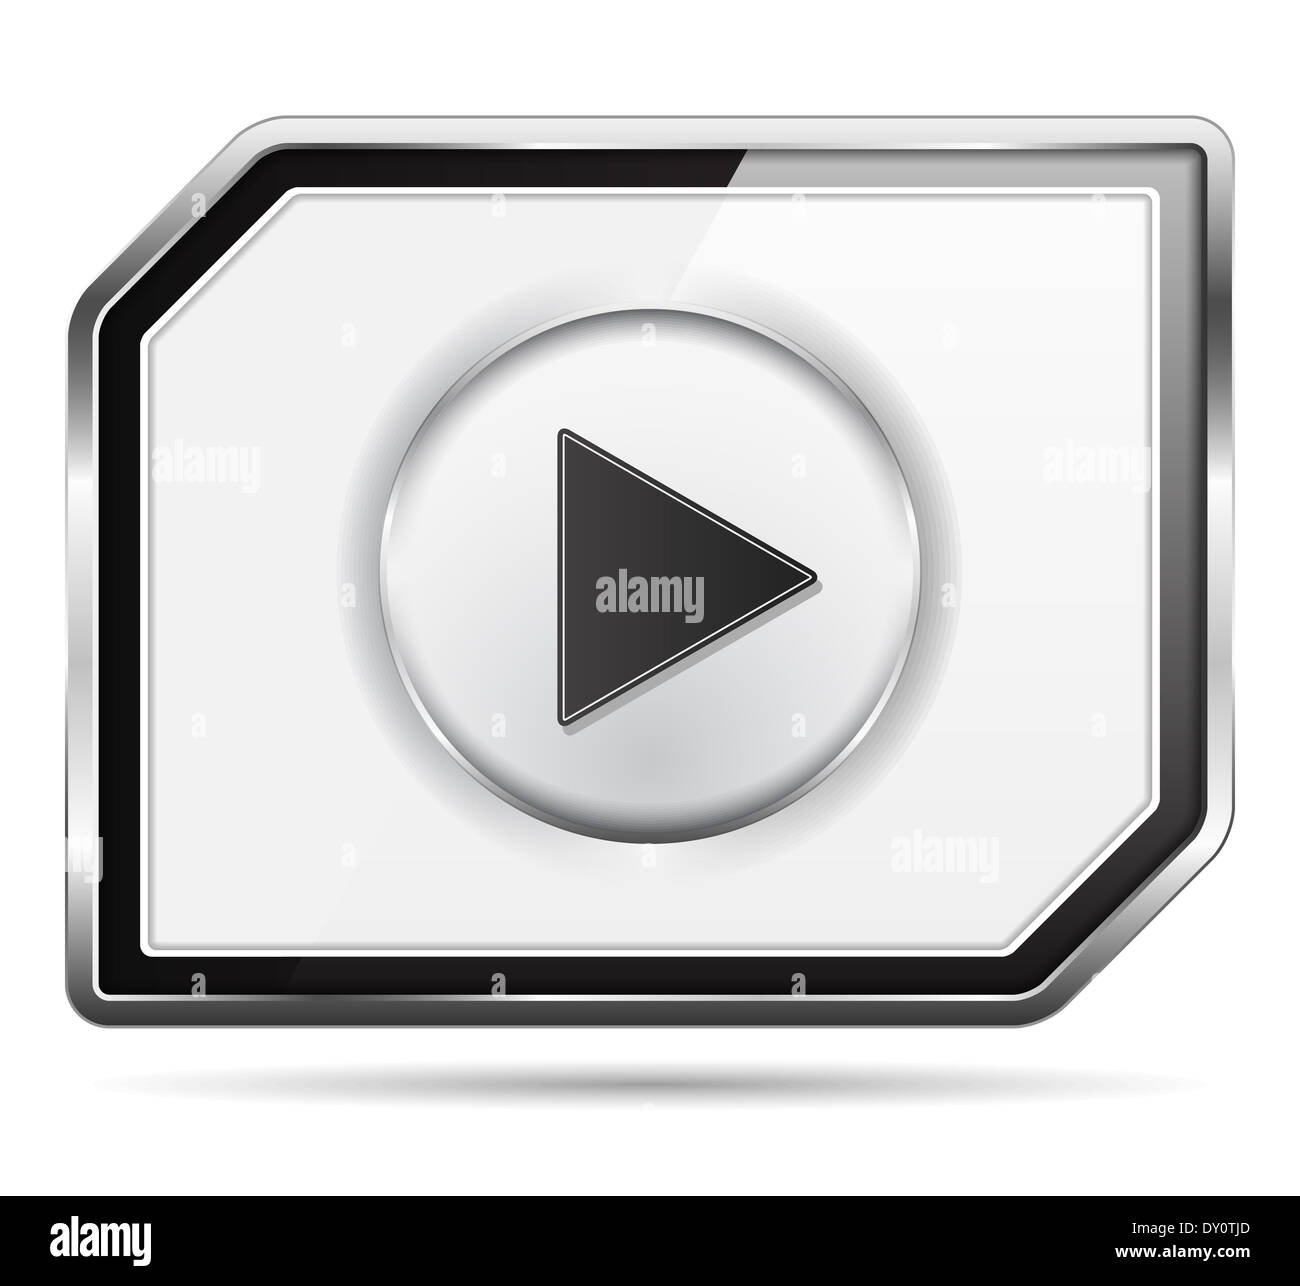 Abstract video player icon Stock Photo